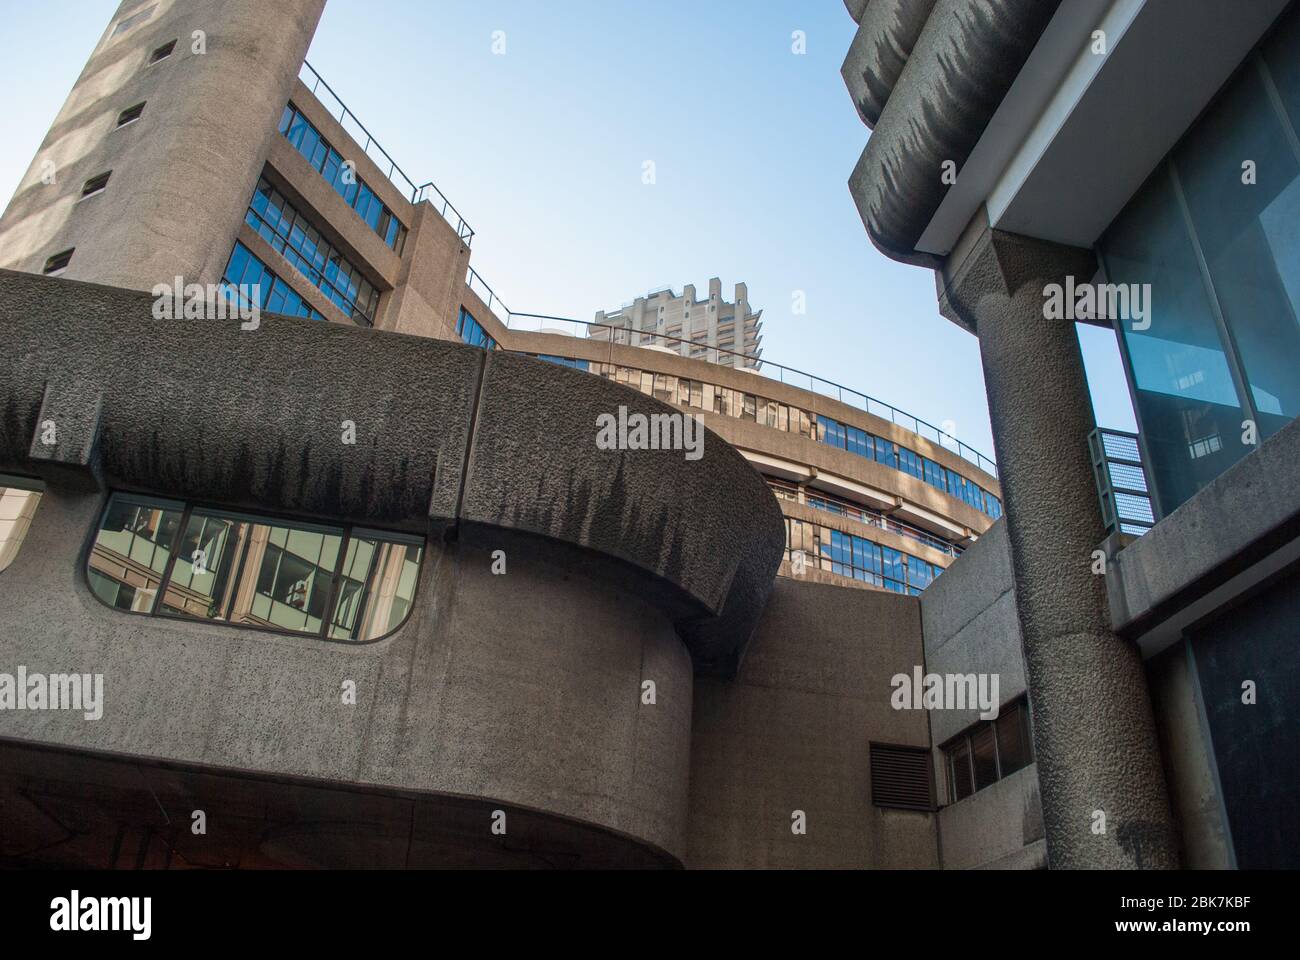 Concrete 1960s Brutalist Architecture Barbican Estate by Chamberlin Powell and Bon Architects Ove Arup on Silk Street, London Stock Photo